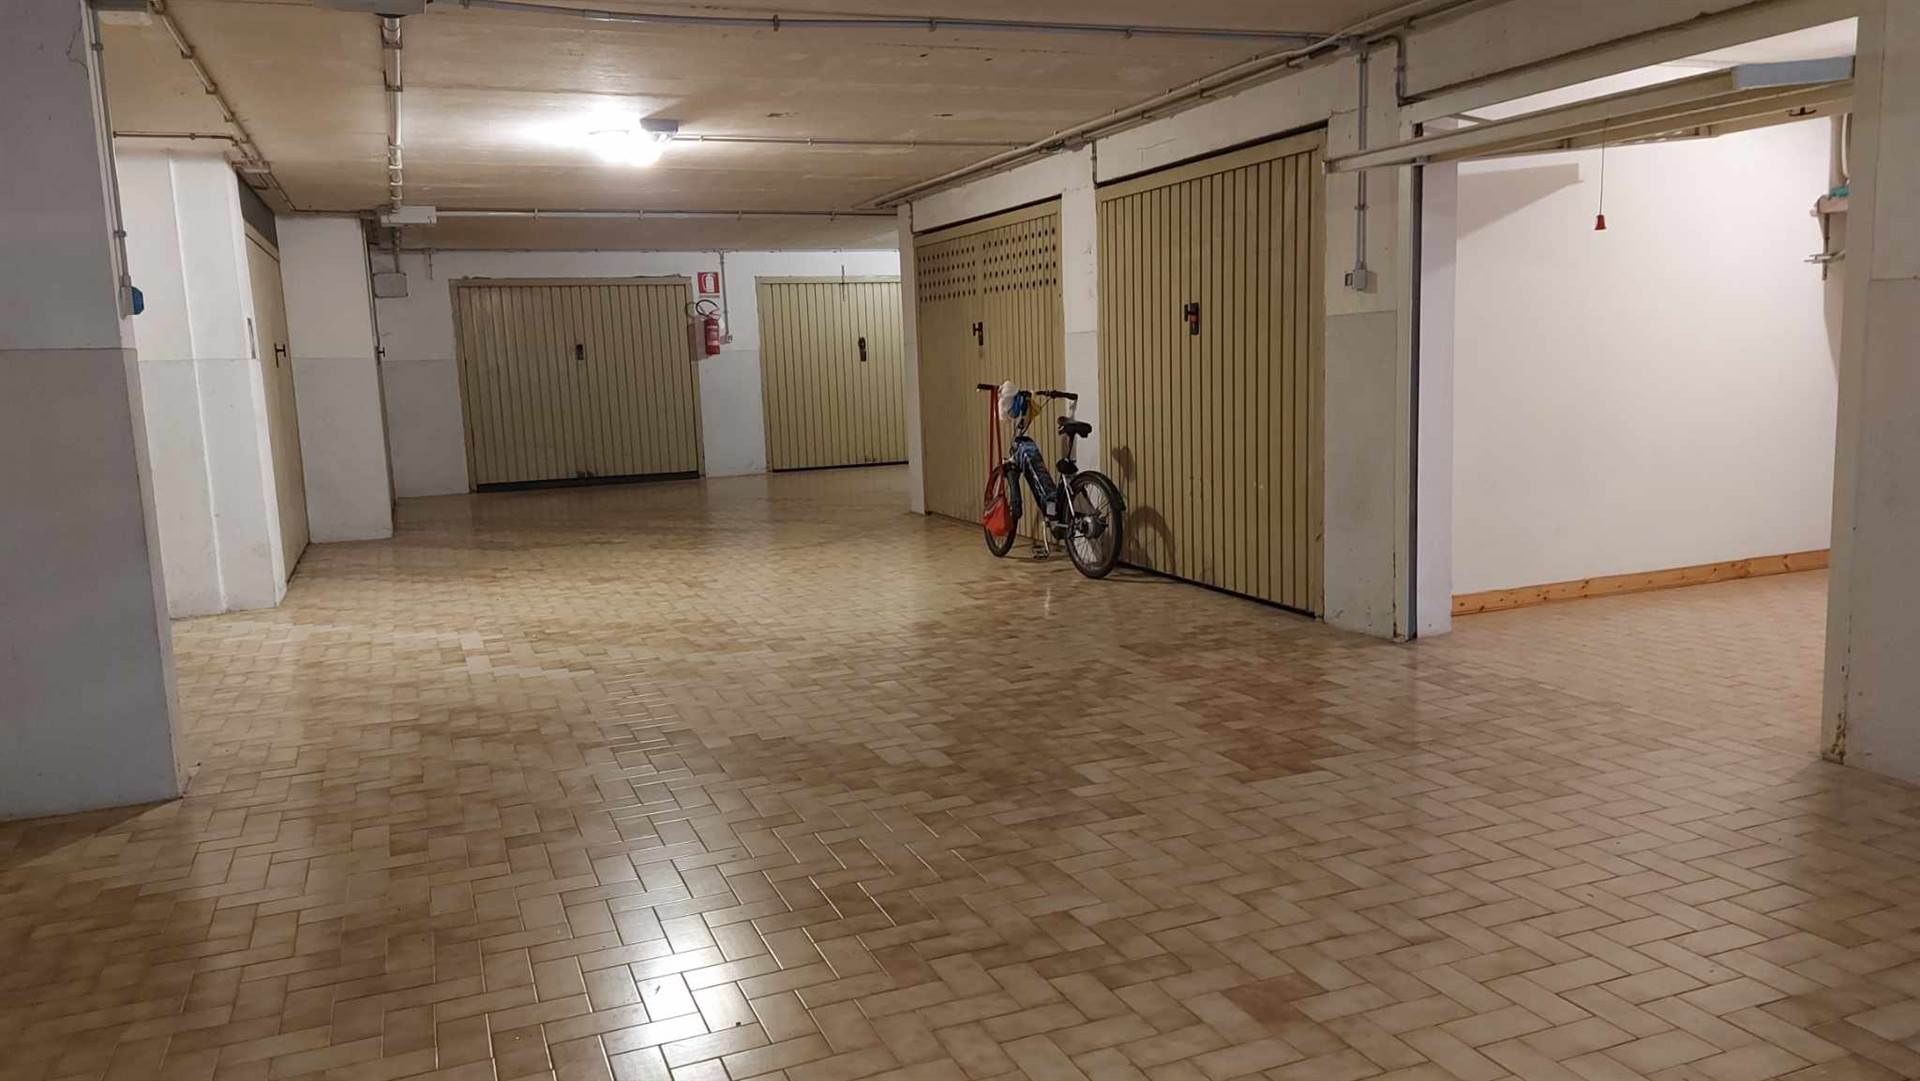 BORGO SAN GIOVANNI, CHIOGGIA, Garage / Parking space for sale of 13 Sq. mt., Energetic class: Not subject, composed by: 1 Room, Single Box, Price: € 